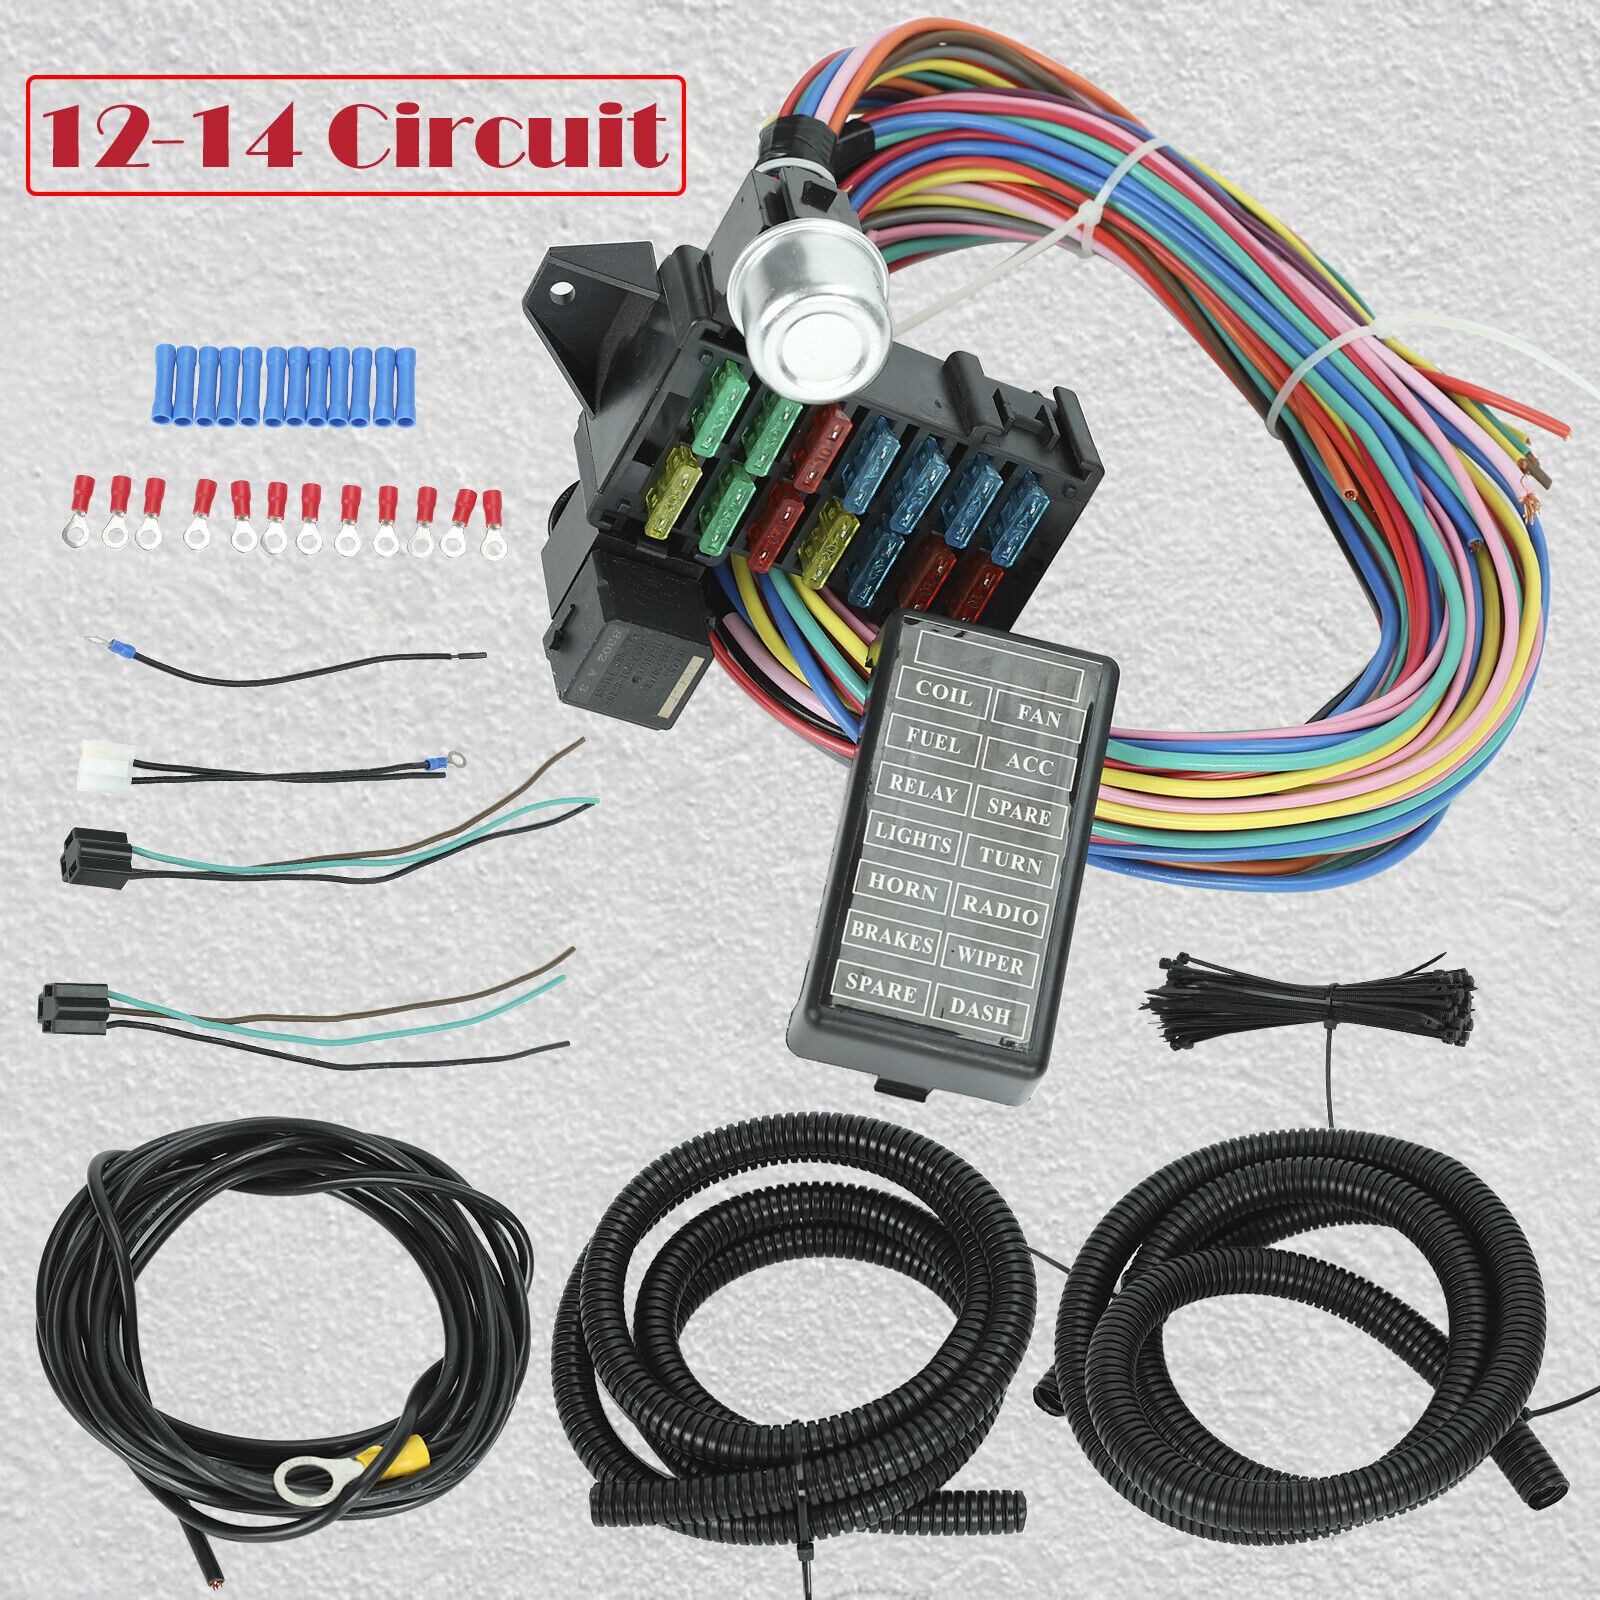 Universal 14 Fuse 12-14 Circuit Wiring Harness For StreetRod Race GXL Copper